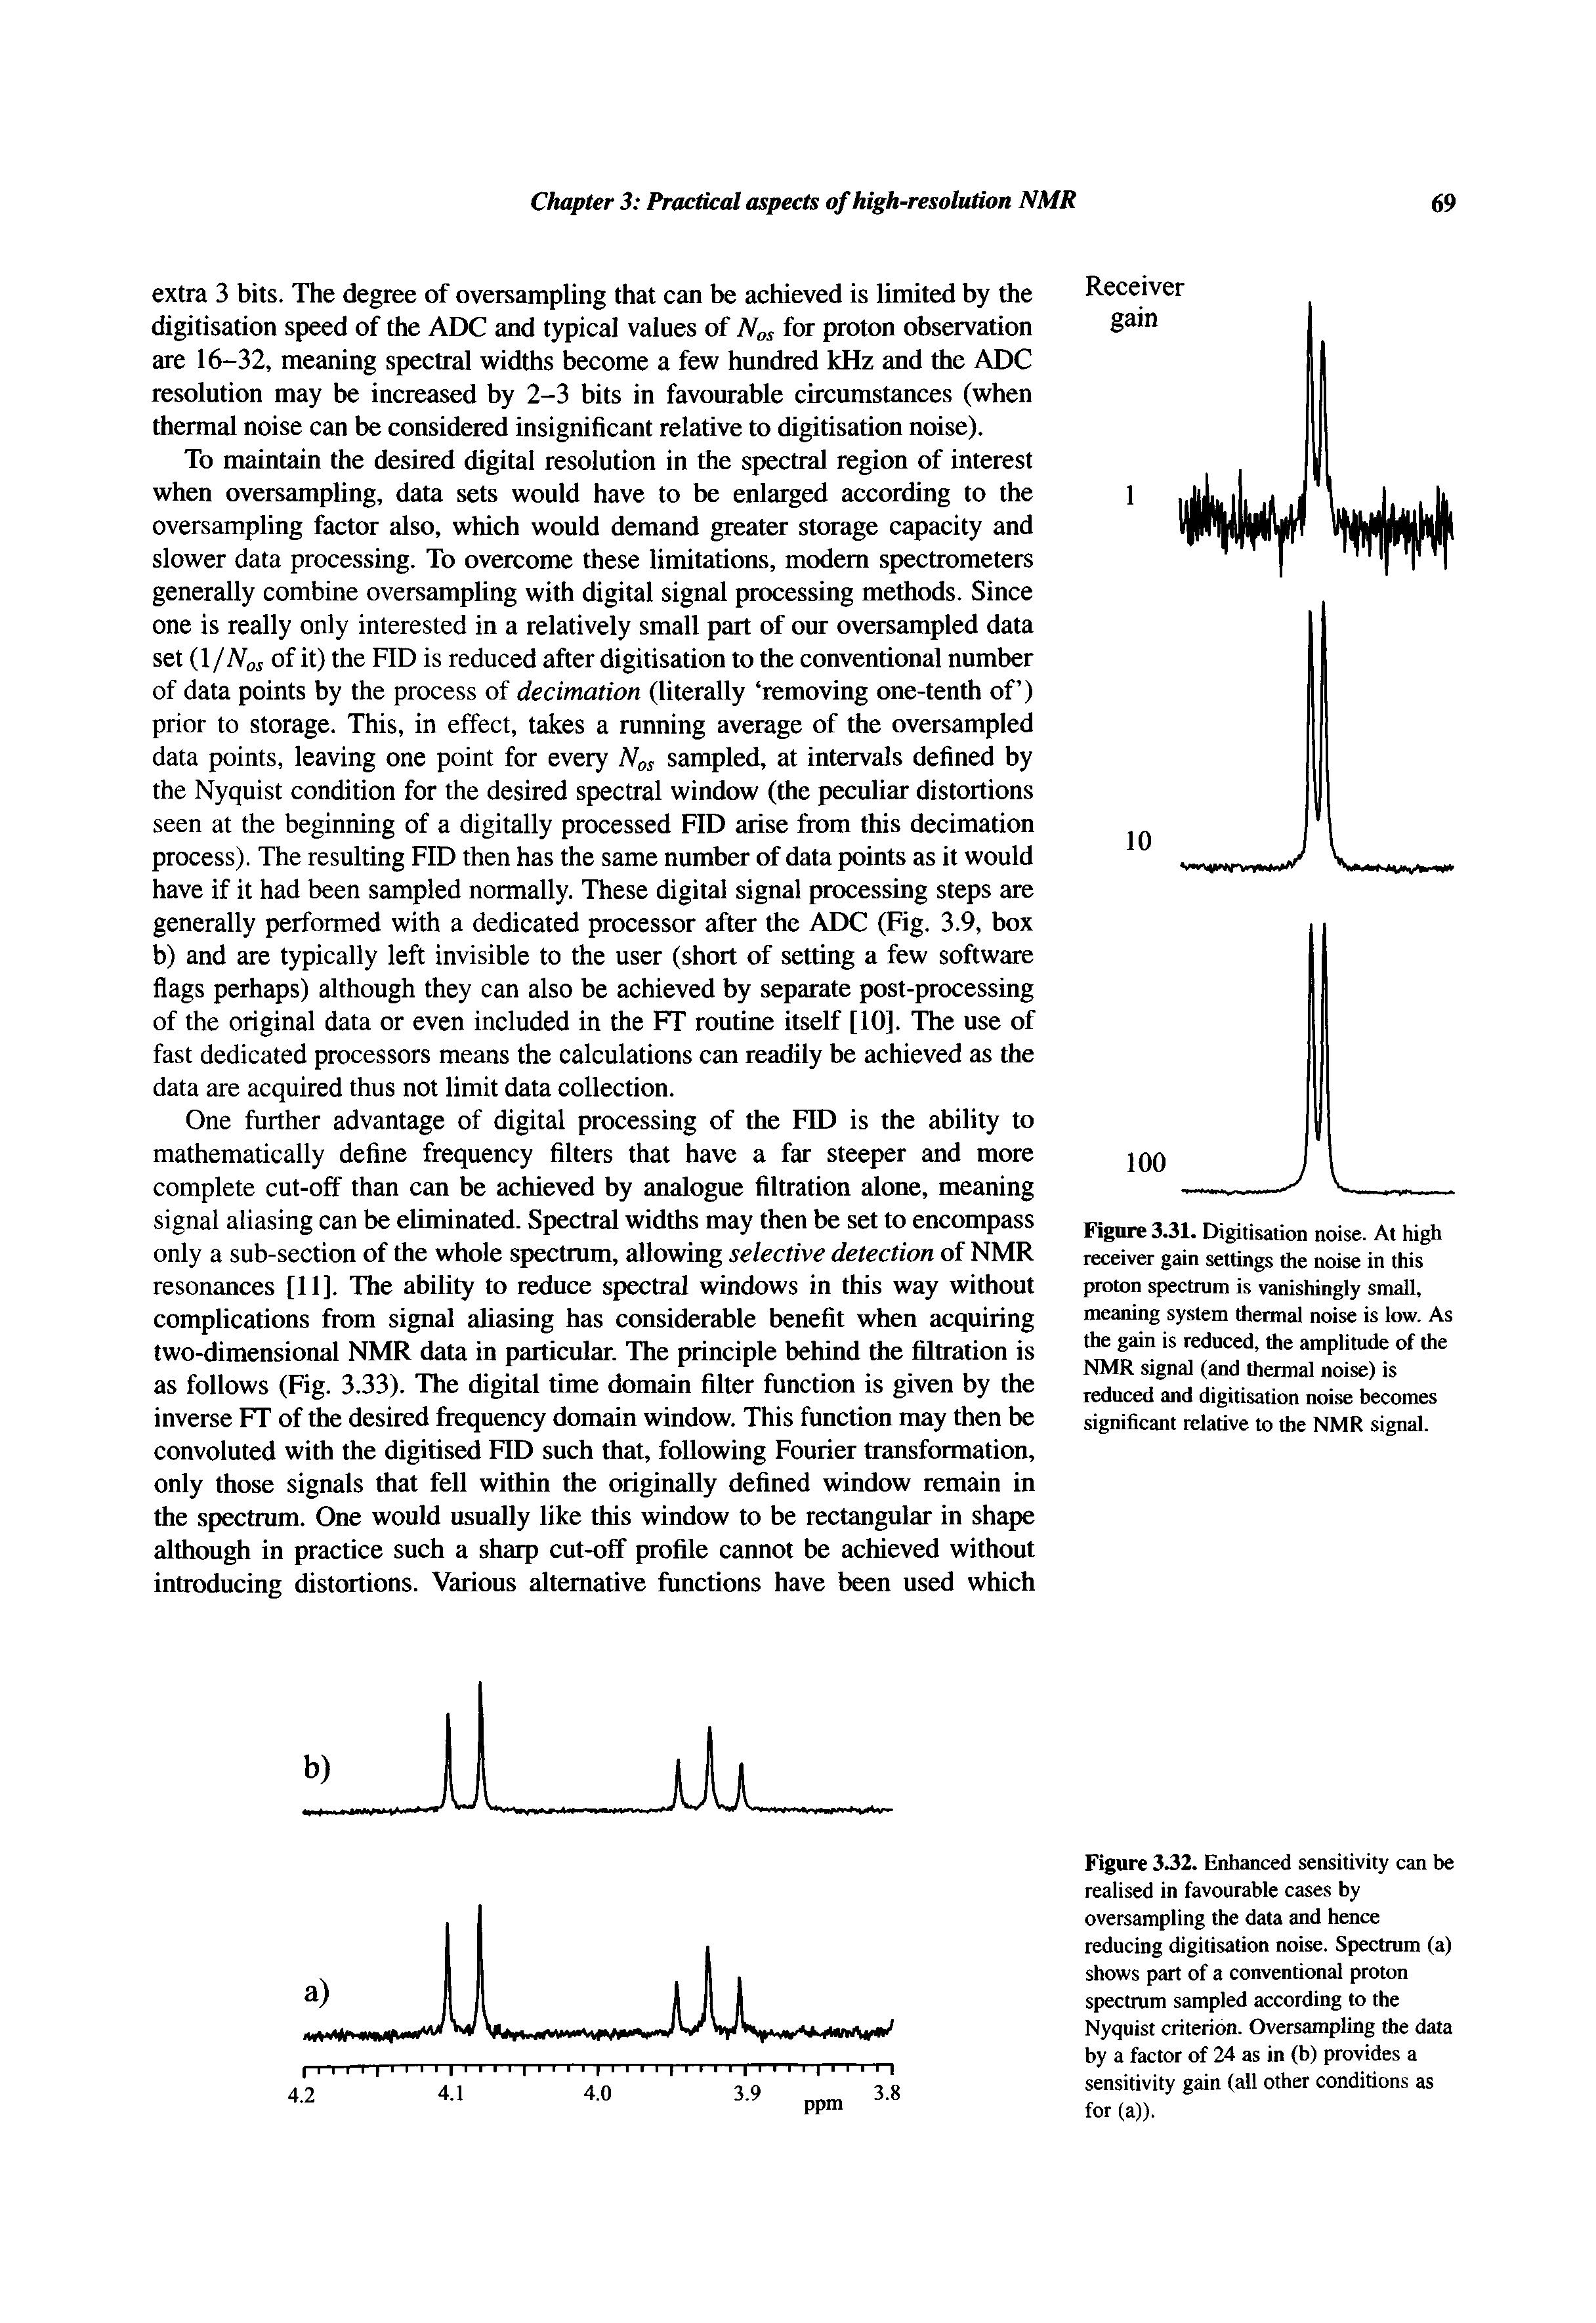 Figure 3.32. Enhanced sensitivity can be realised in favourable cases by oversampling the data and hence reducing digitisation noise. Spectrum (a) shows part of a conventional proton spectrum sampled according to the Nyquist criterion. Oversampling the data by a factor of 24 as in (b) provides a sensitivity gain (all other conditions as for (a)).